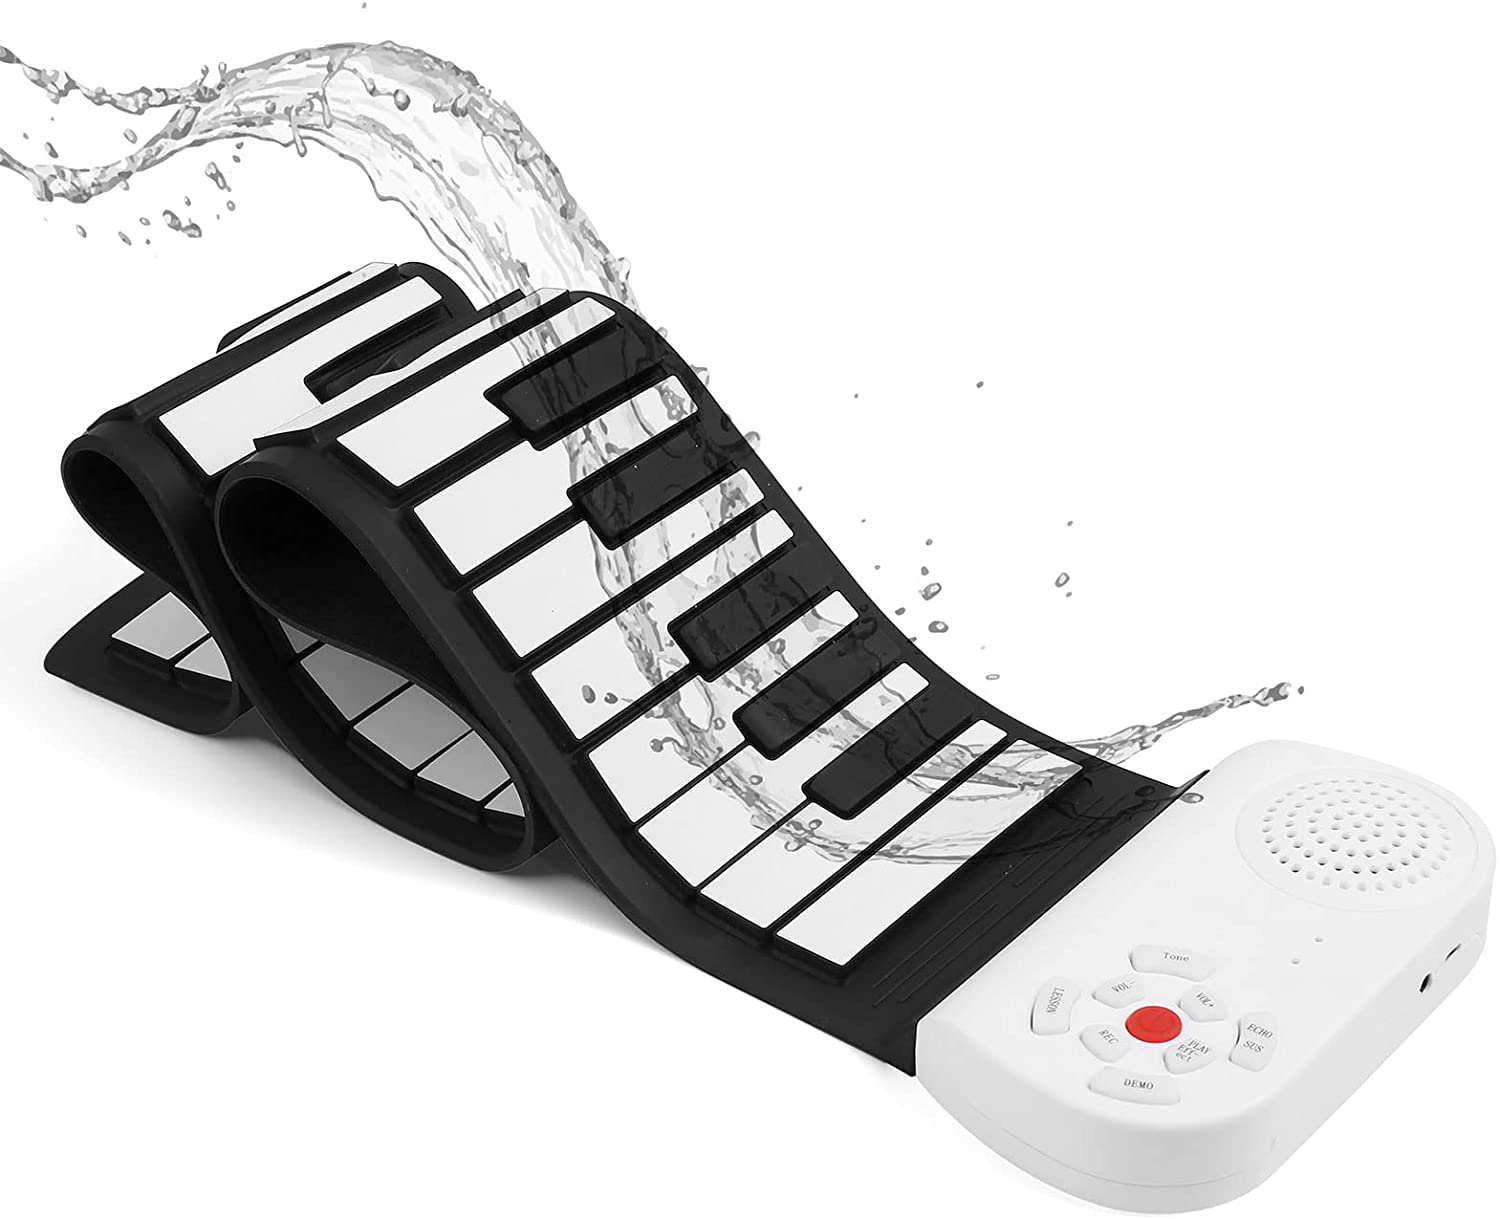 Hami Roll up Piano Portable Electronic Piano for Beginners and Kids ，49 Keys Colorful Flexible Kid'S Foldable Roll up Educational Electronic Digital Music Piano Keyboard with Recording